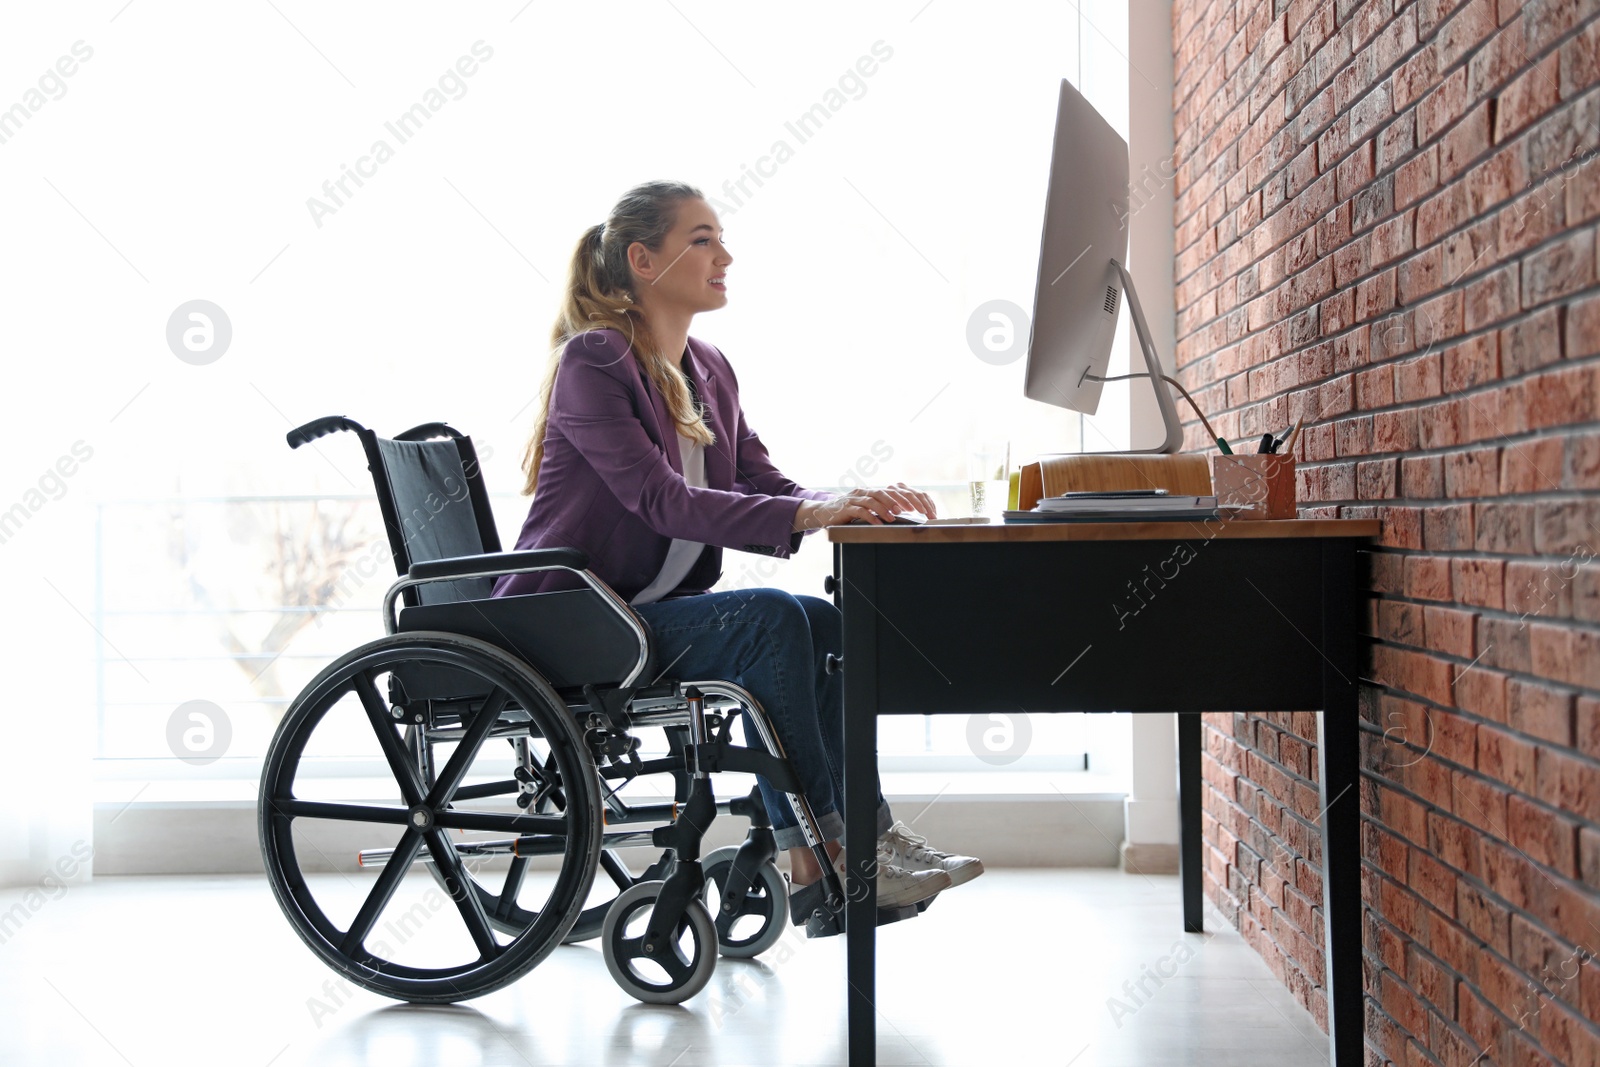 Photo of Woman in wheelchair working with computer at table indoors